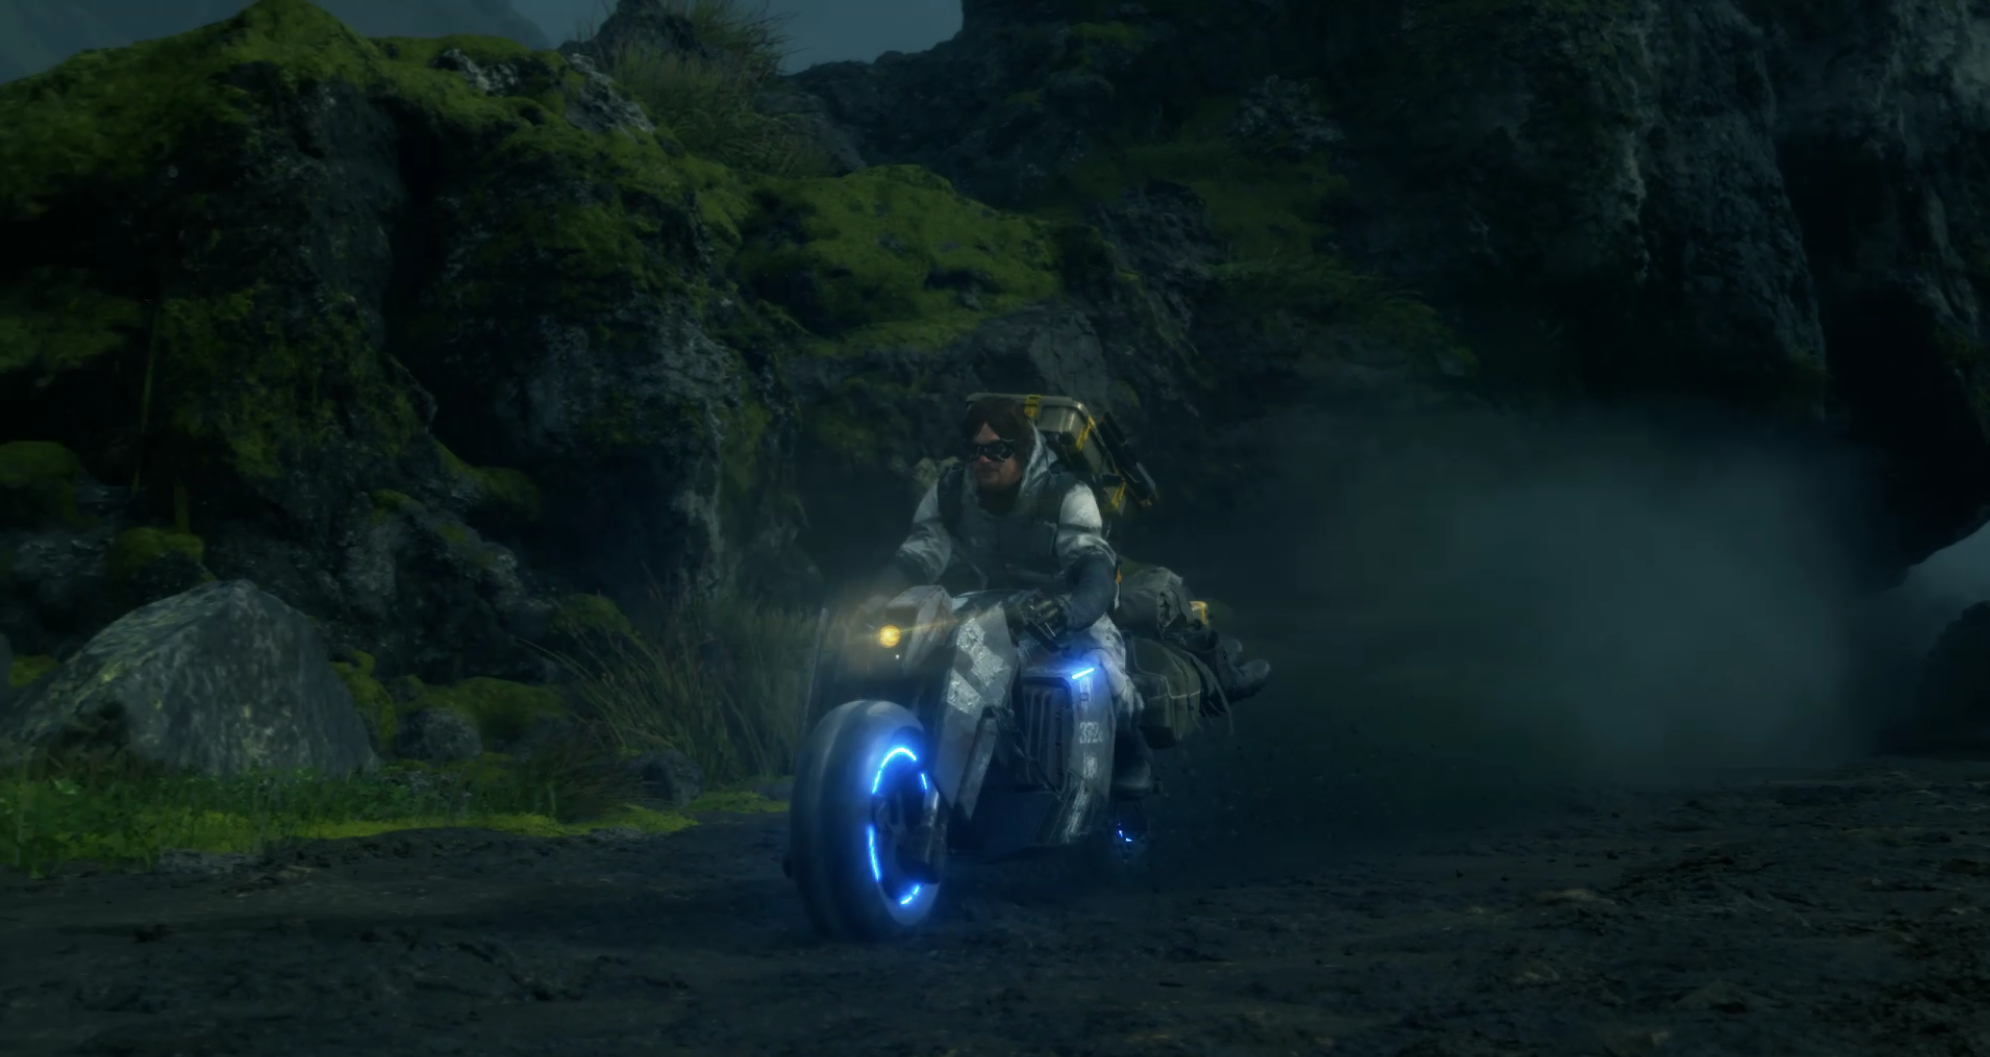 Sam from Death Stranding on a futuristic looking motorcycle